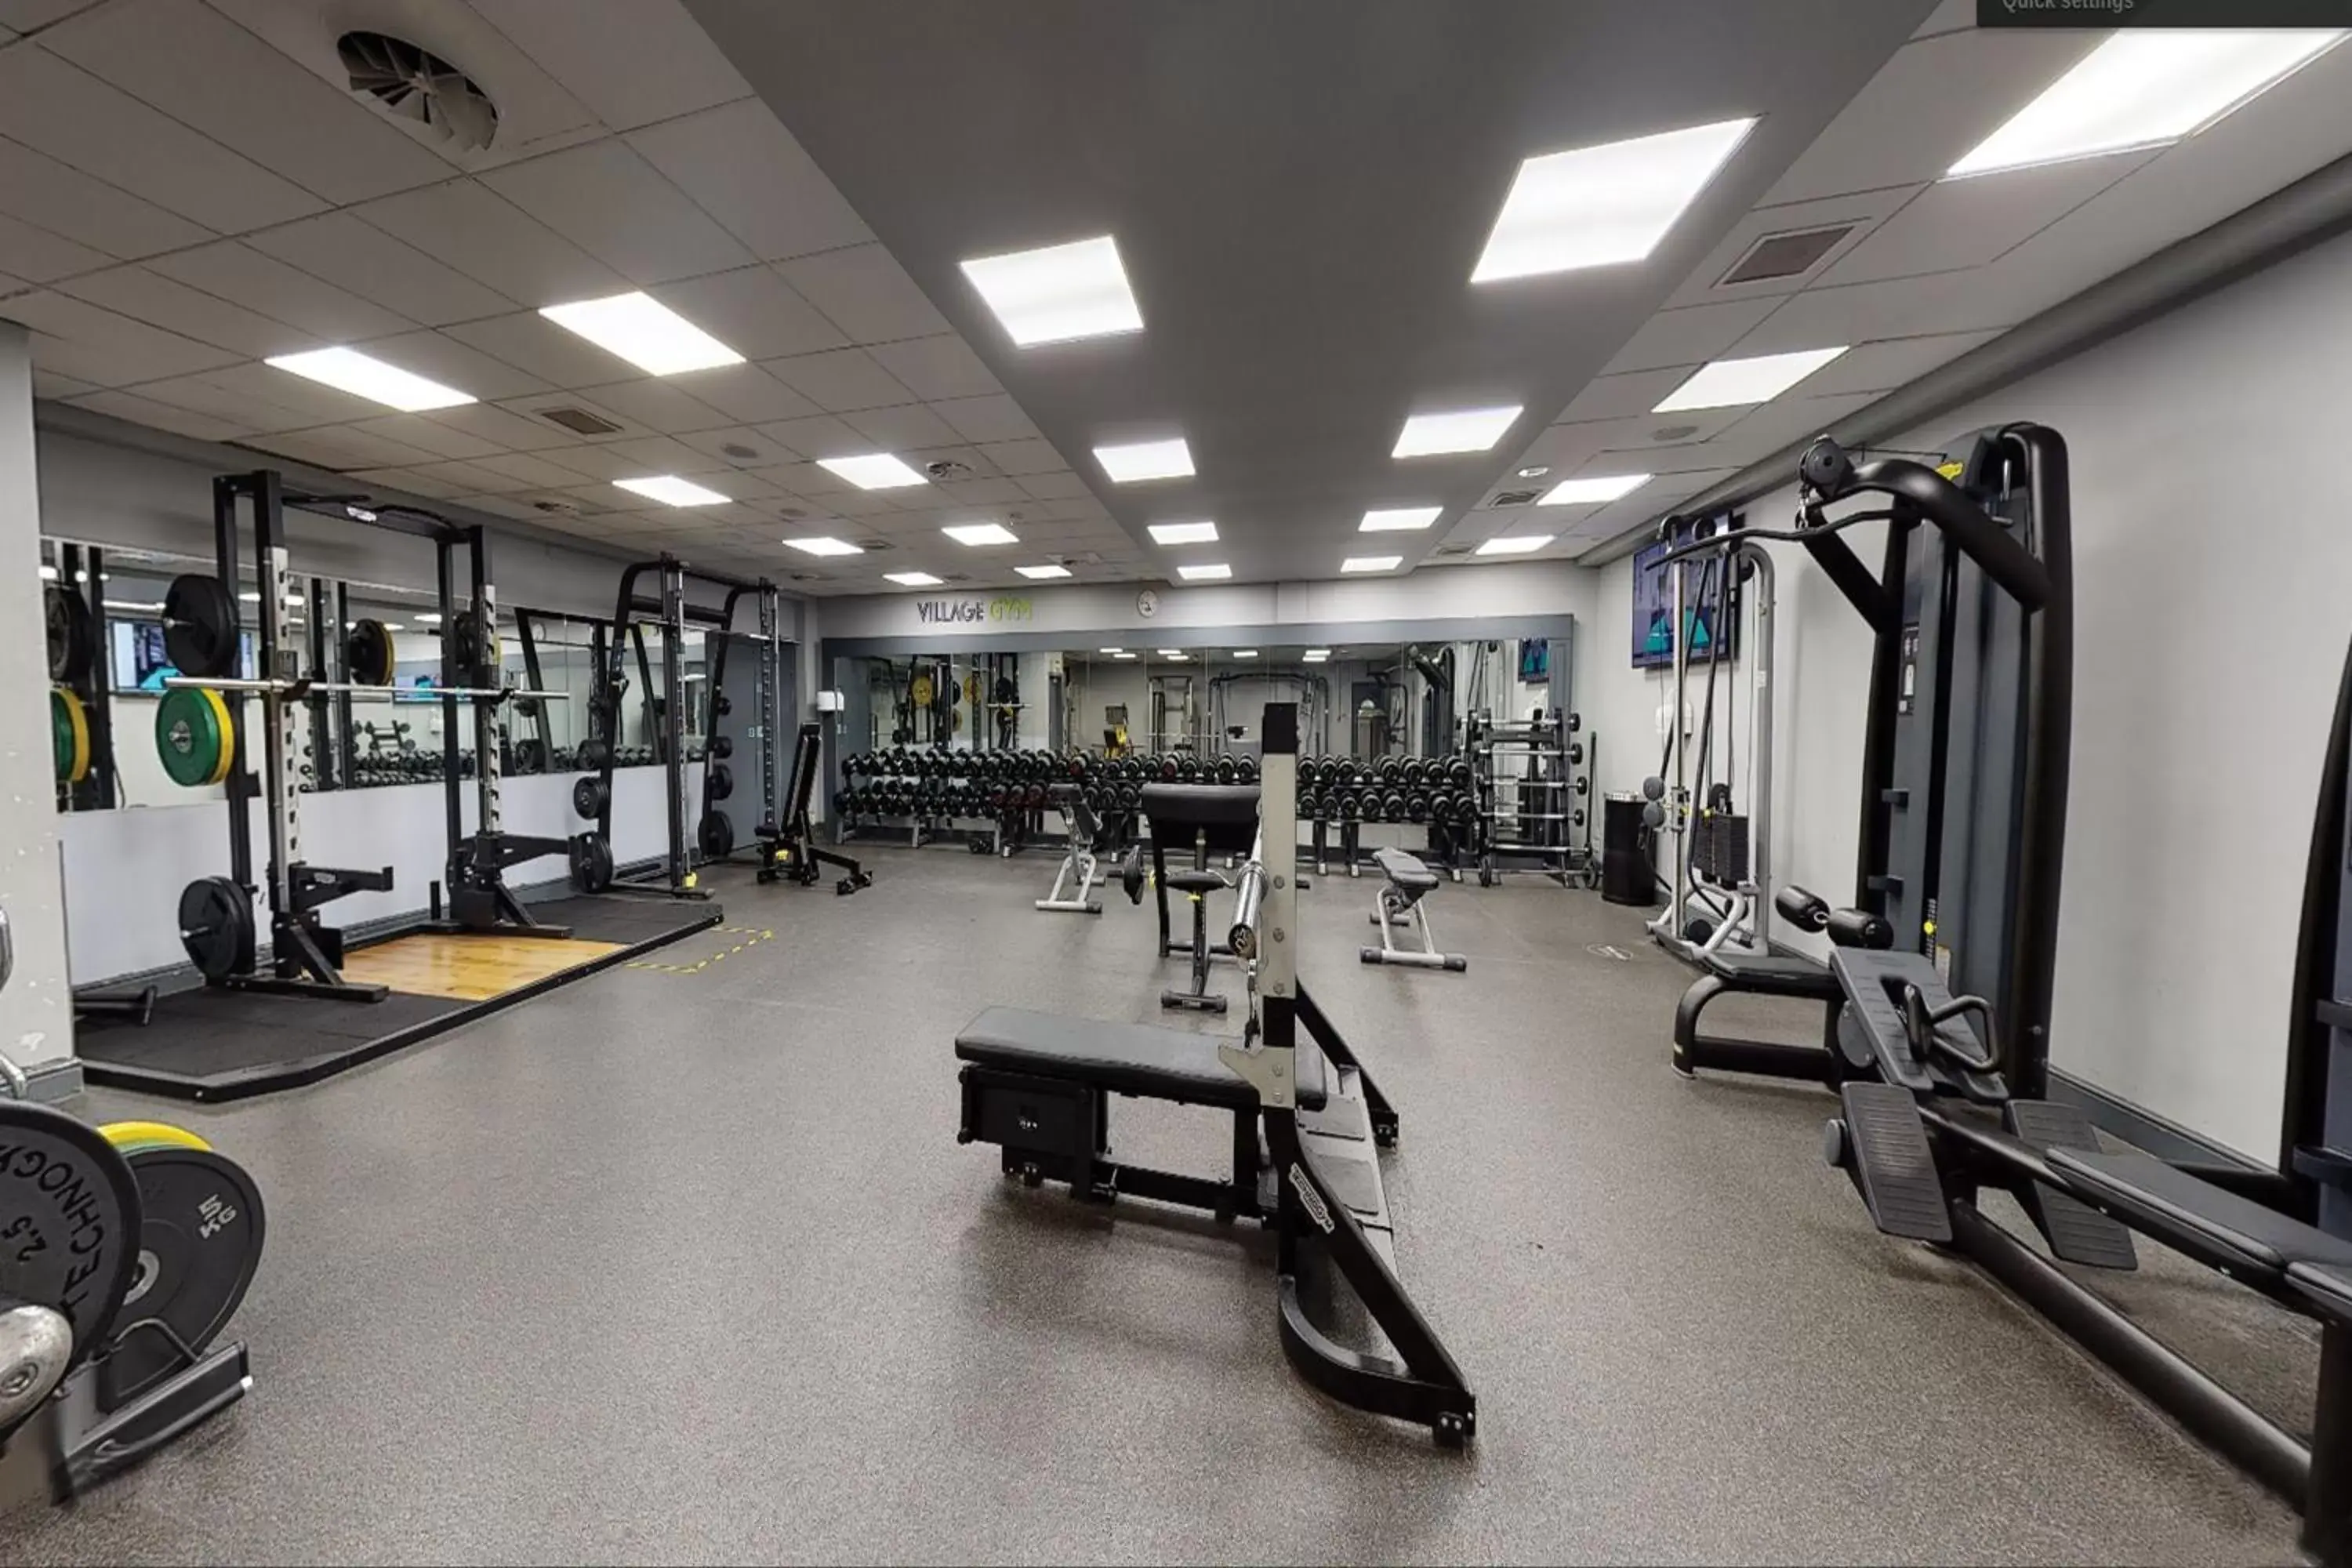 Fitness centre/facilities, Fitness Center/Facilities in Village Hotel Leeds North